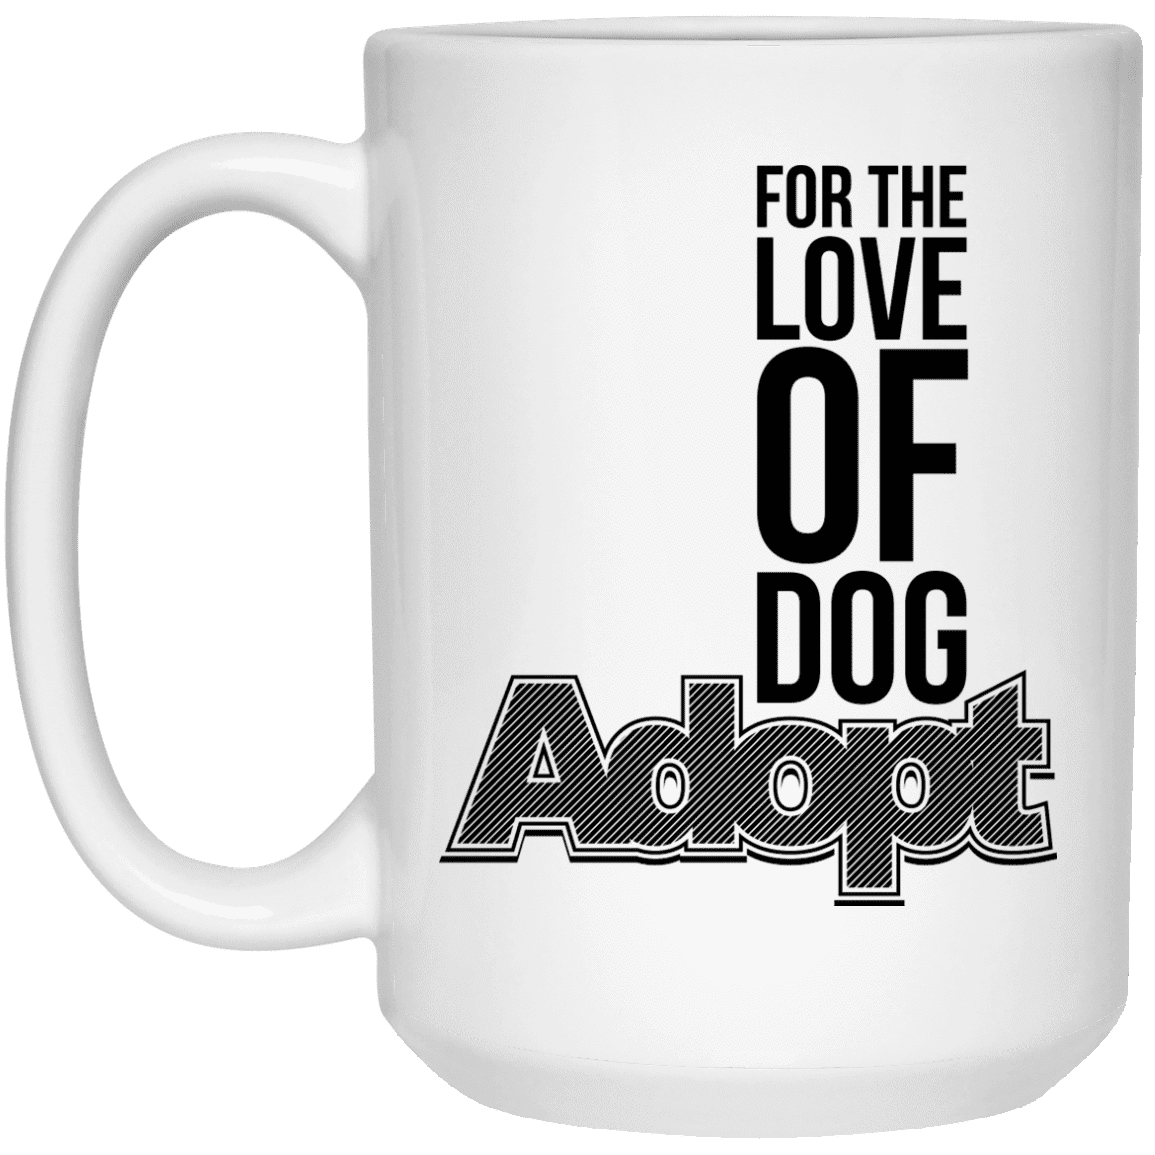 For The Love Of Dog Adopt - Mugs.